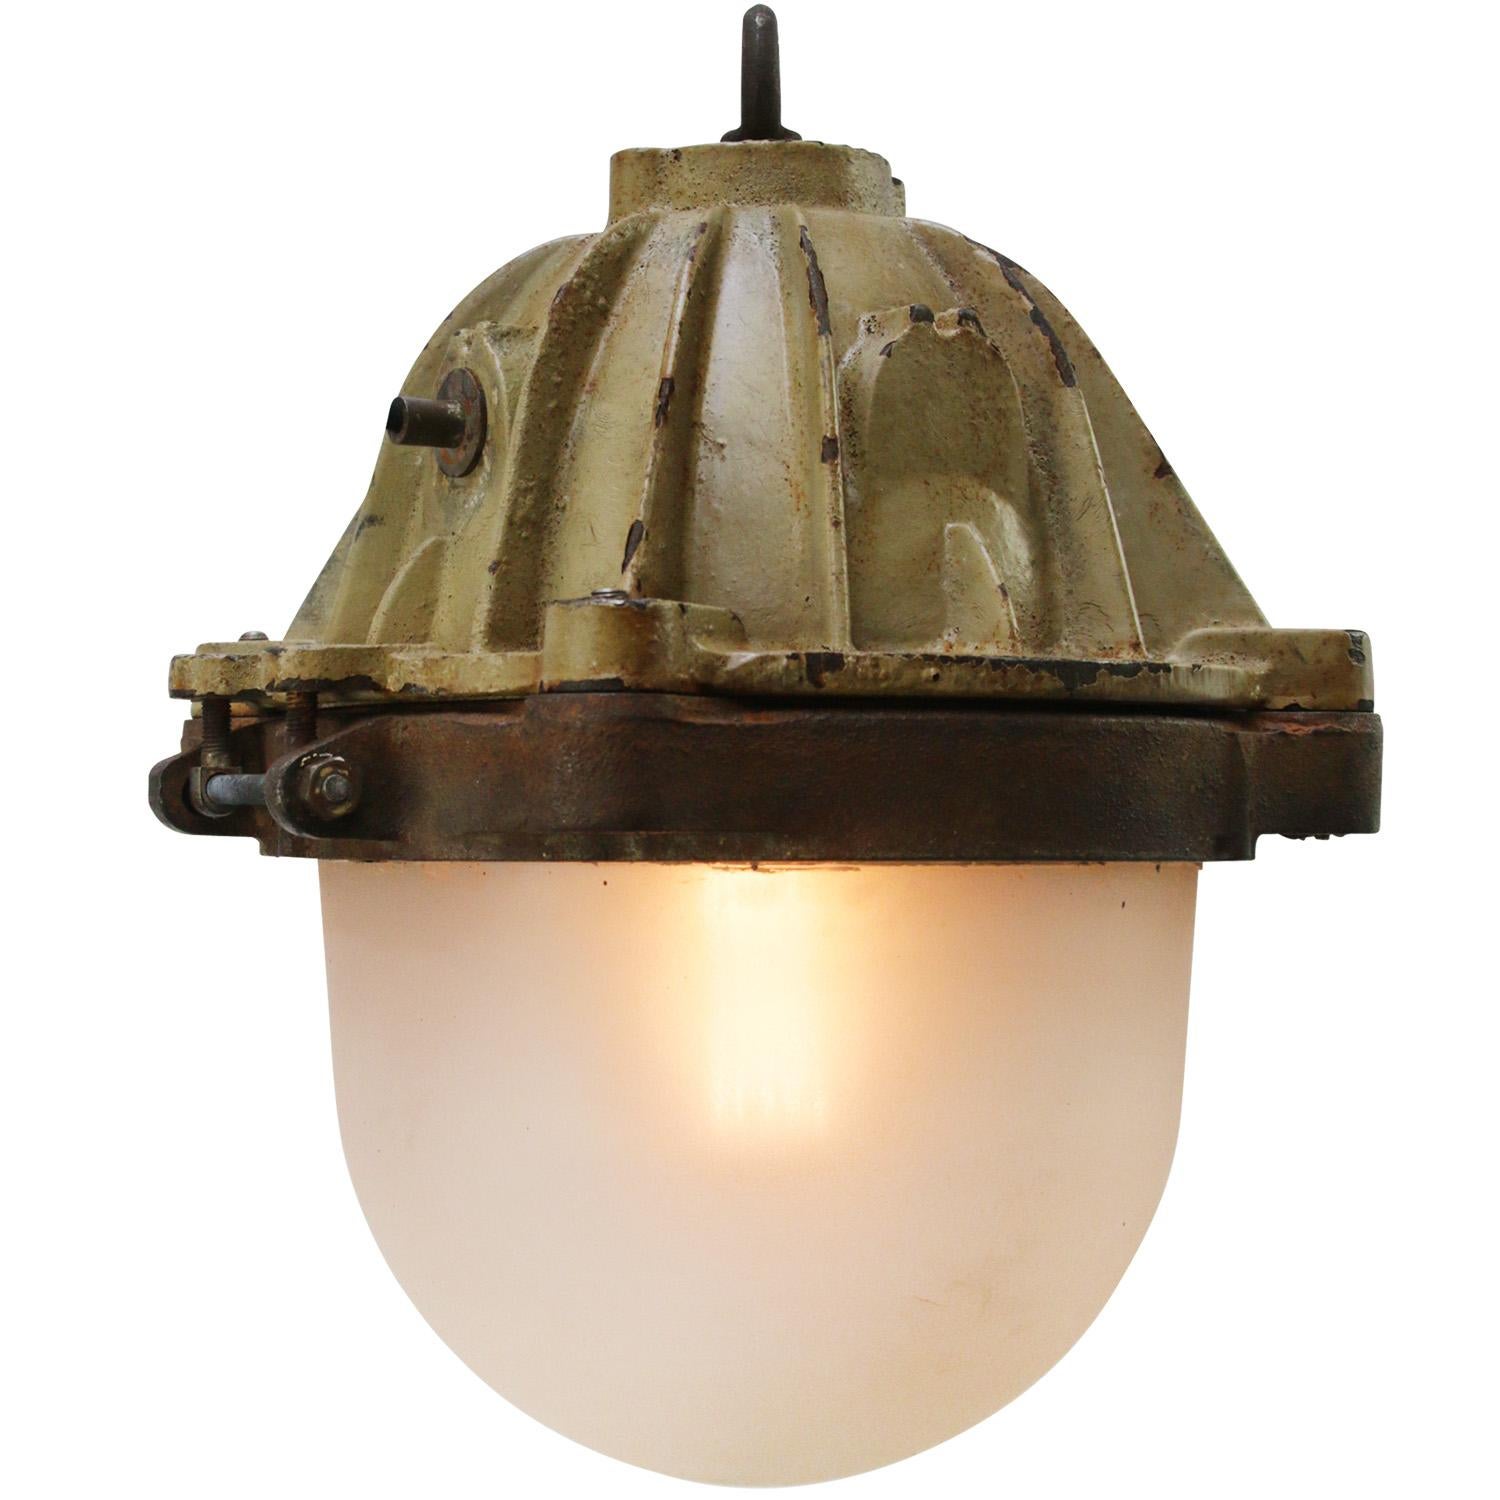 Extra large French industrial hanging lamp by Mapelec Amiens
Brown cast iron
Frosted glass

Weight: 20.00 kg / 44.1 lb

Priced per individual item. All lamps have been made suitable by international standards for incandescent light bulbs,